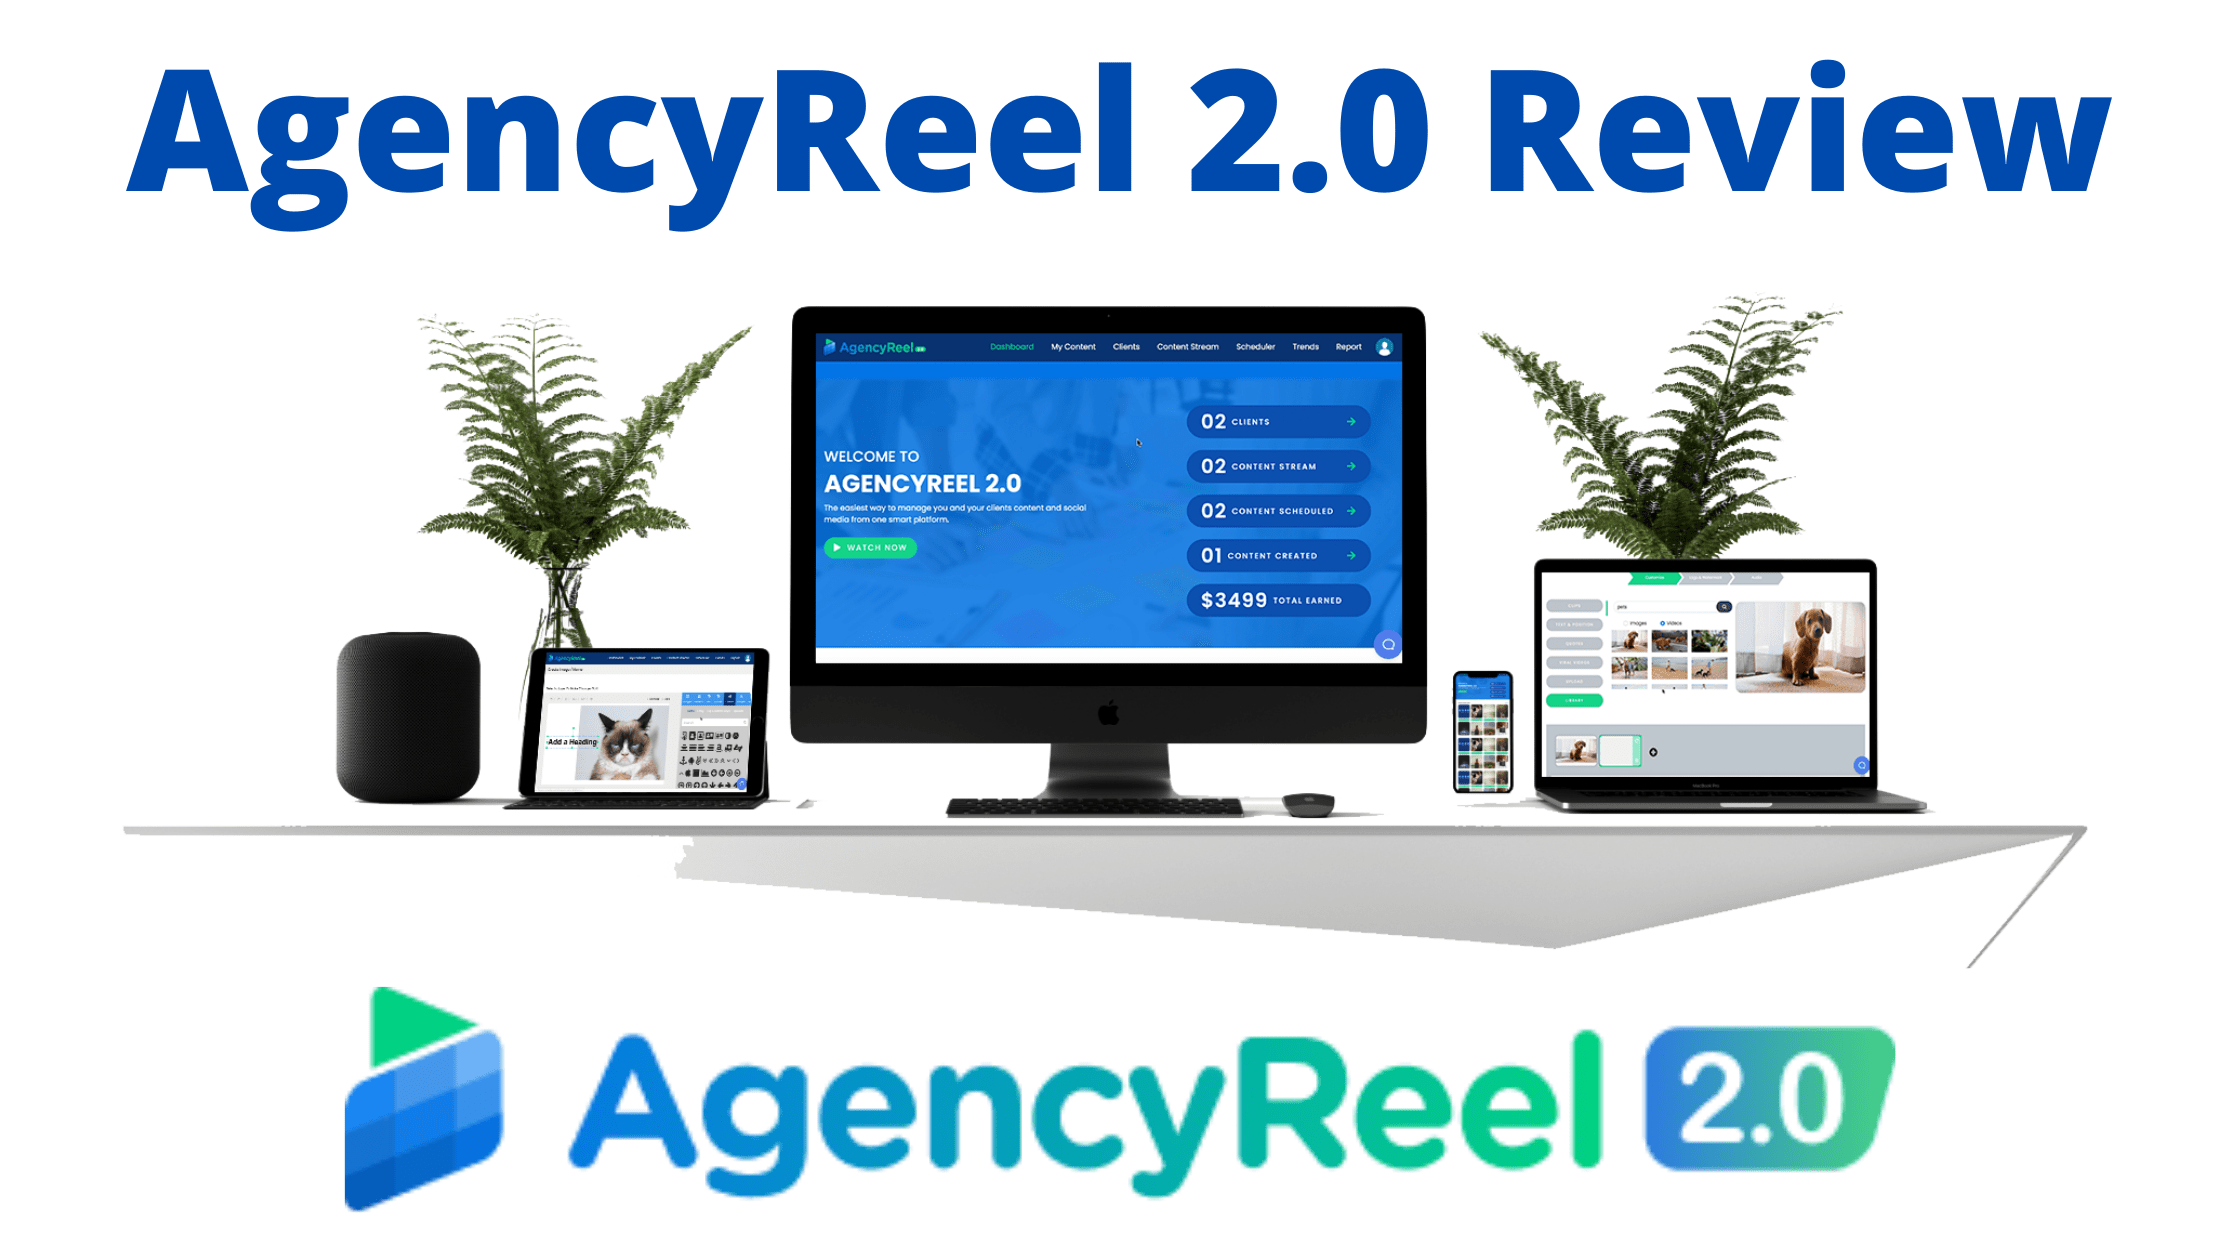 AgencyReel 2.0 Review